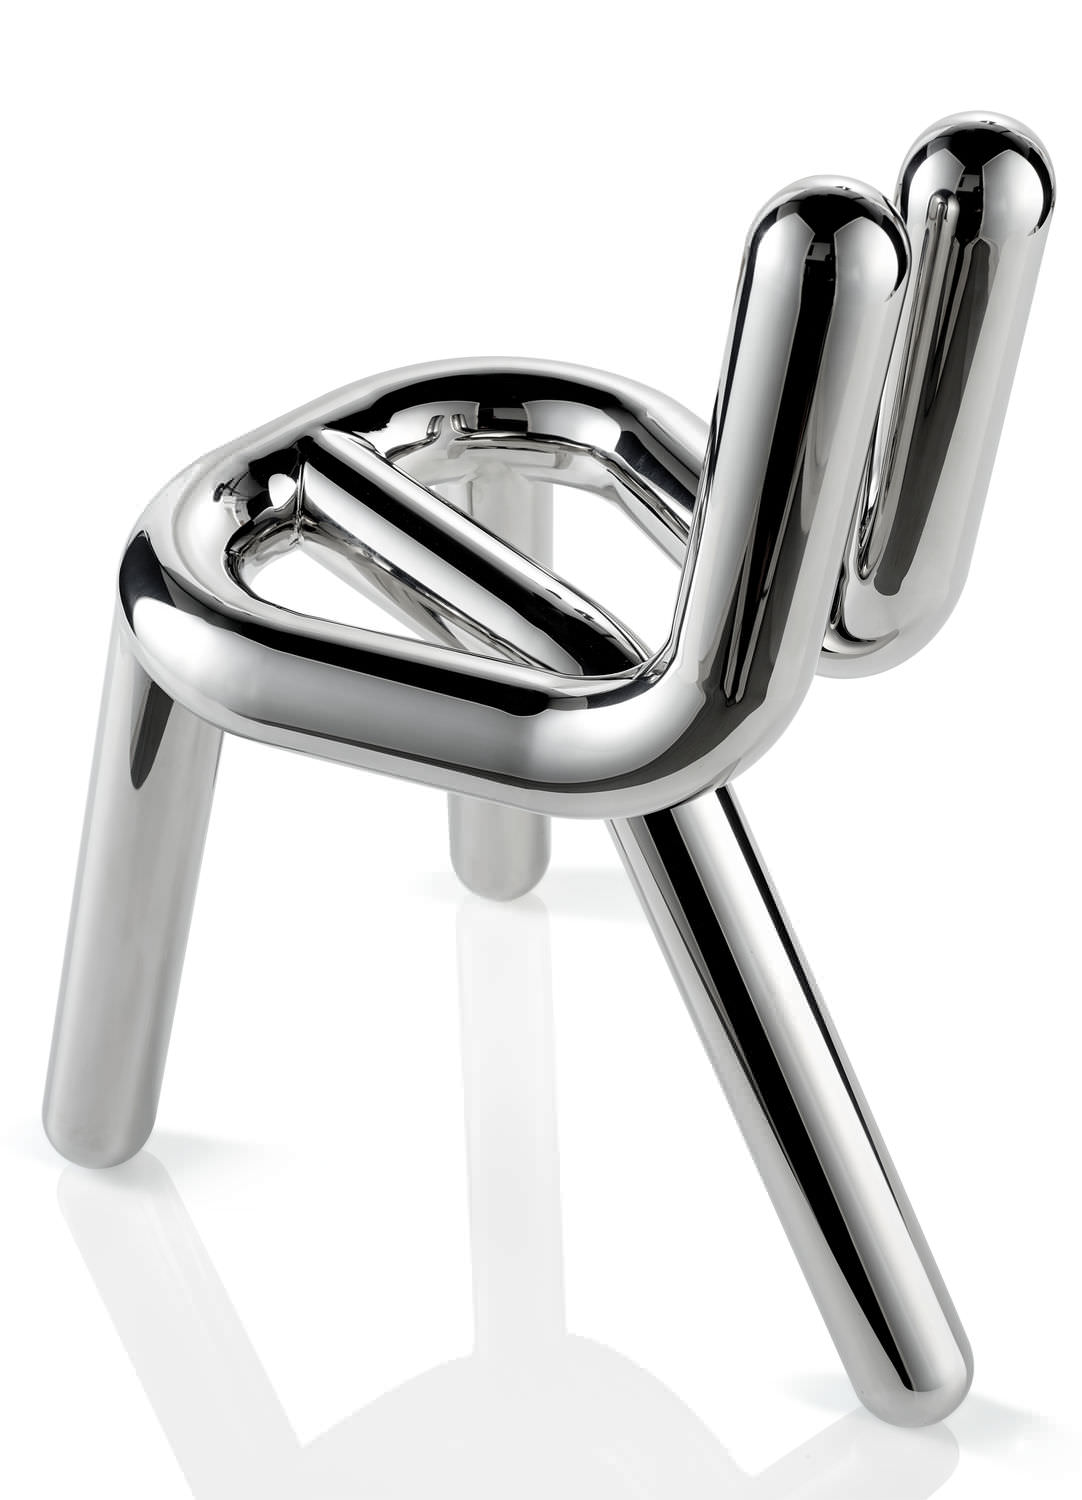 Line Chair by Toni Grilo for Riluc